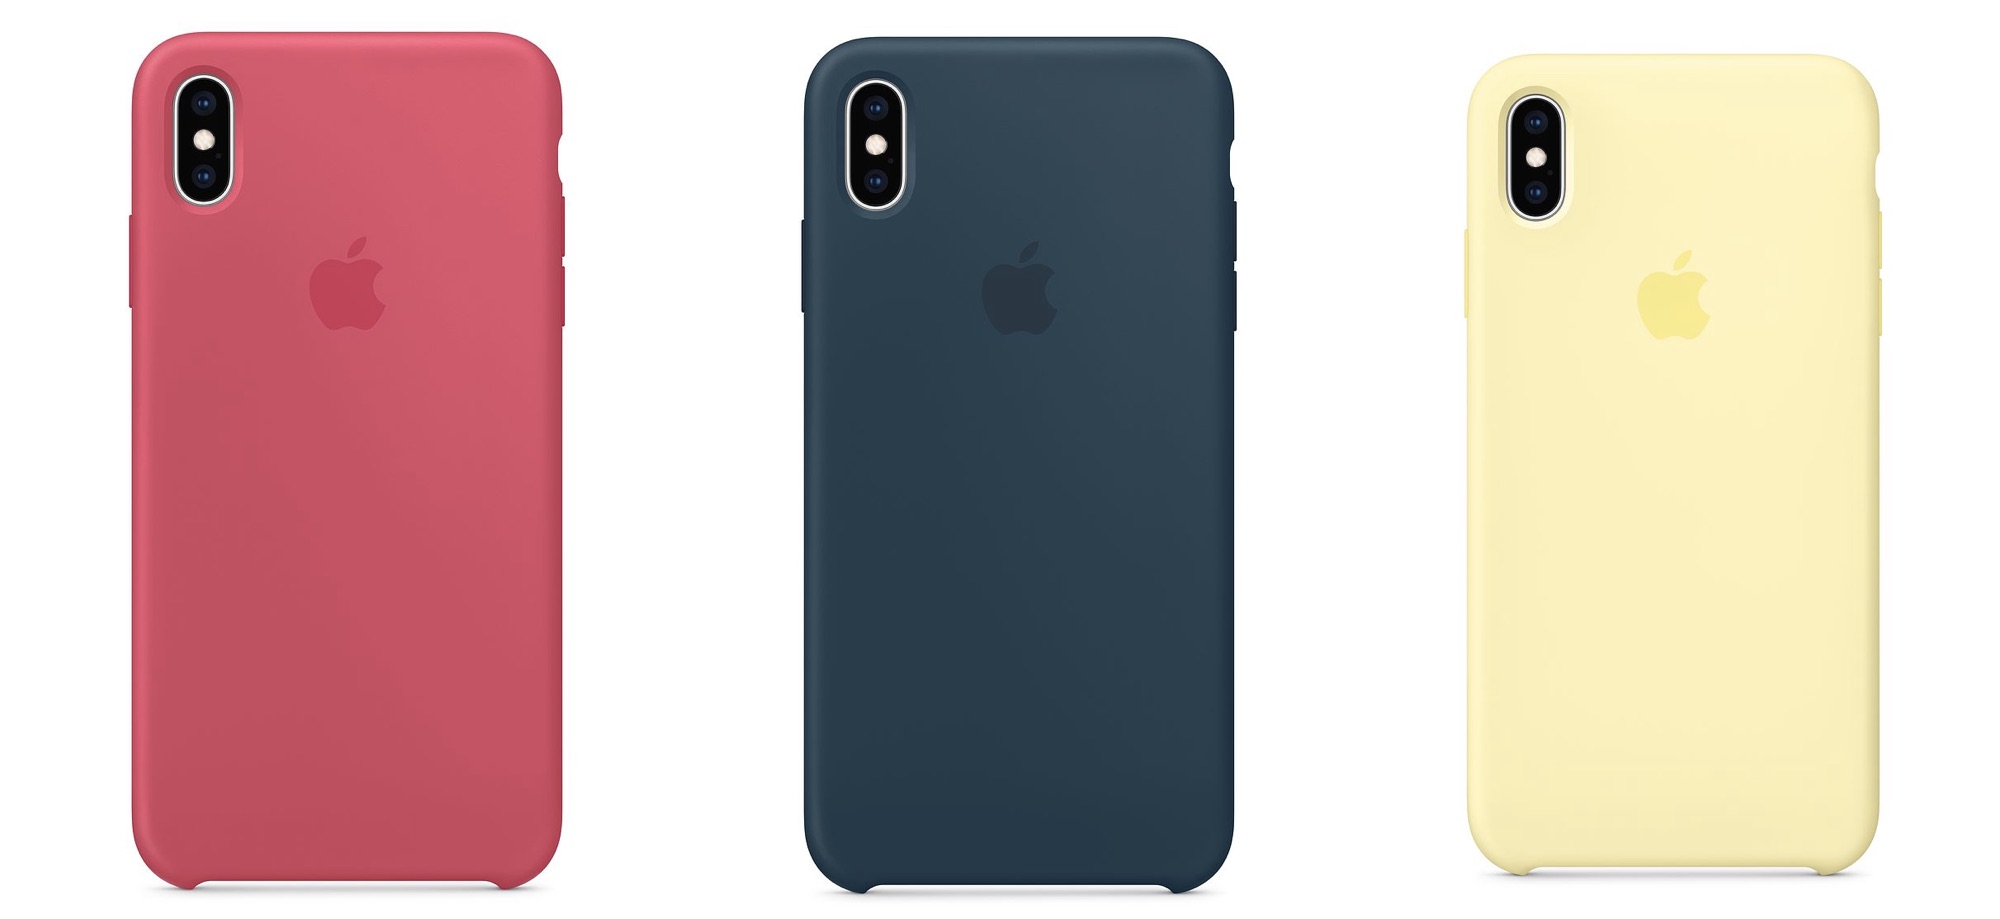 Apple Releases New Iphone Xs Case And Apple Watch Sport Band Colors Still No Iphone Xr Cases 9to5mac